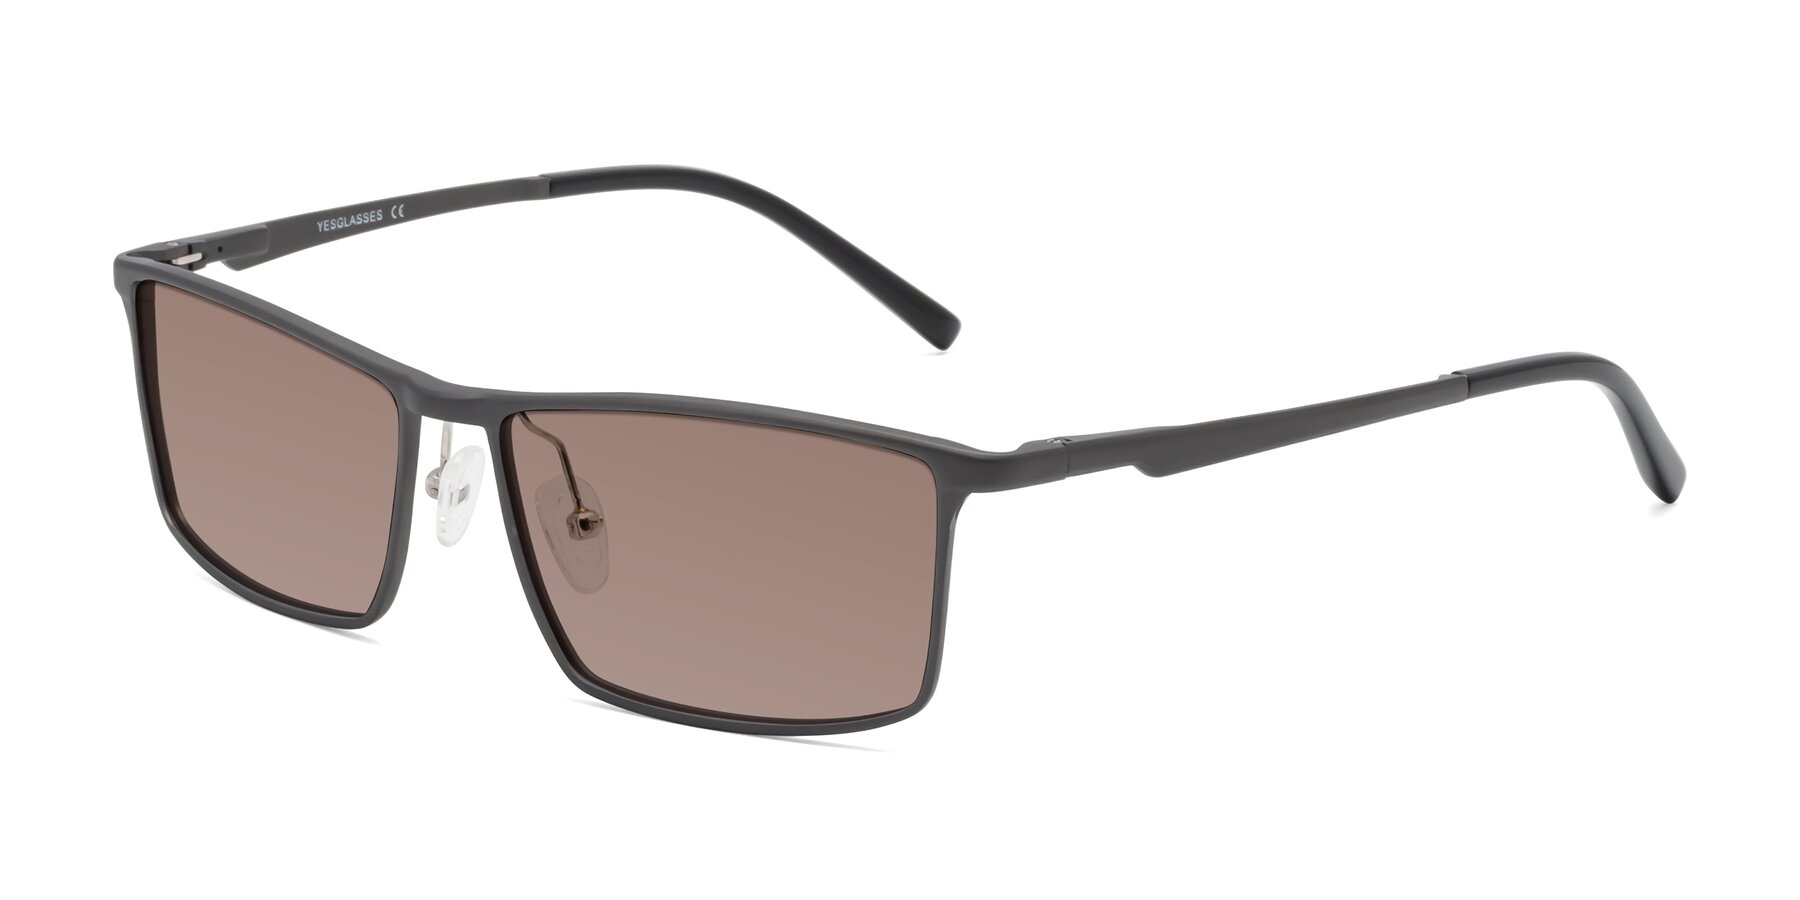 Angle of CX6330 in Gunmetal with Medium Brown Tinted Lenses